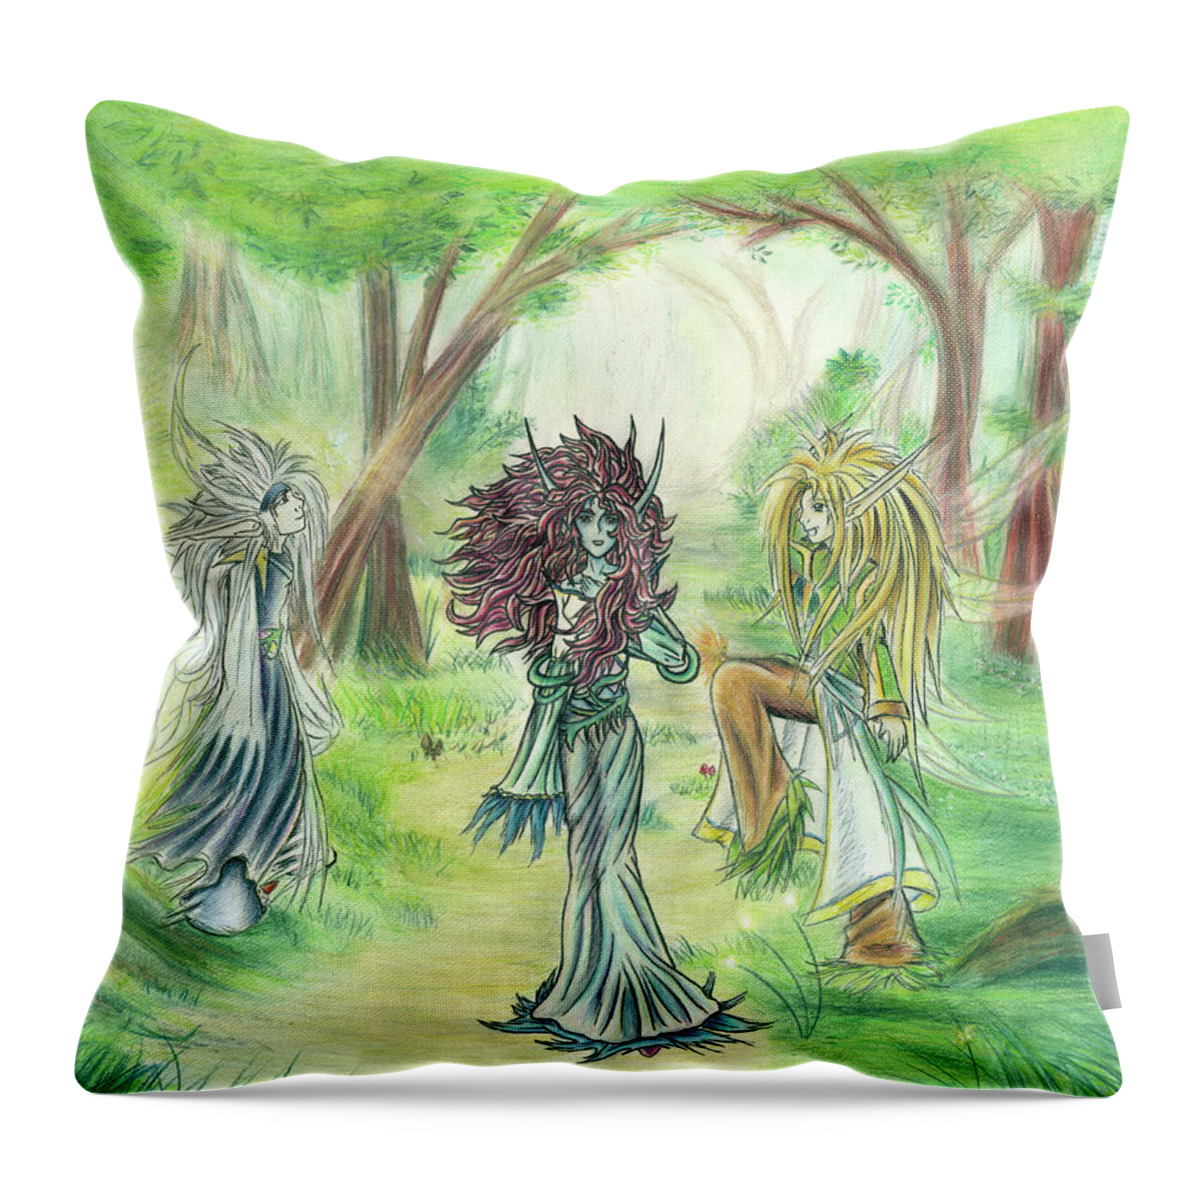 Fae Throw Pillow featuring the painting The Fae - Sylvan Creatures of the Forest by Shawn Dall